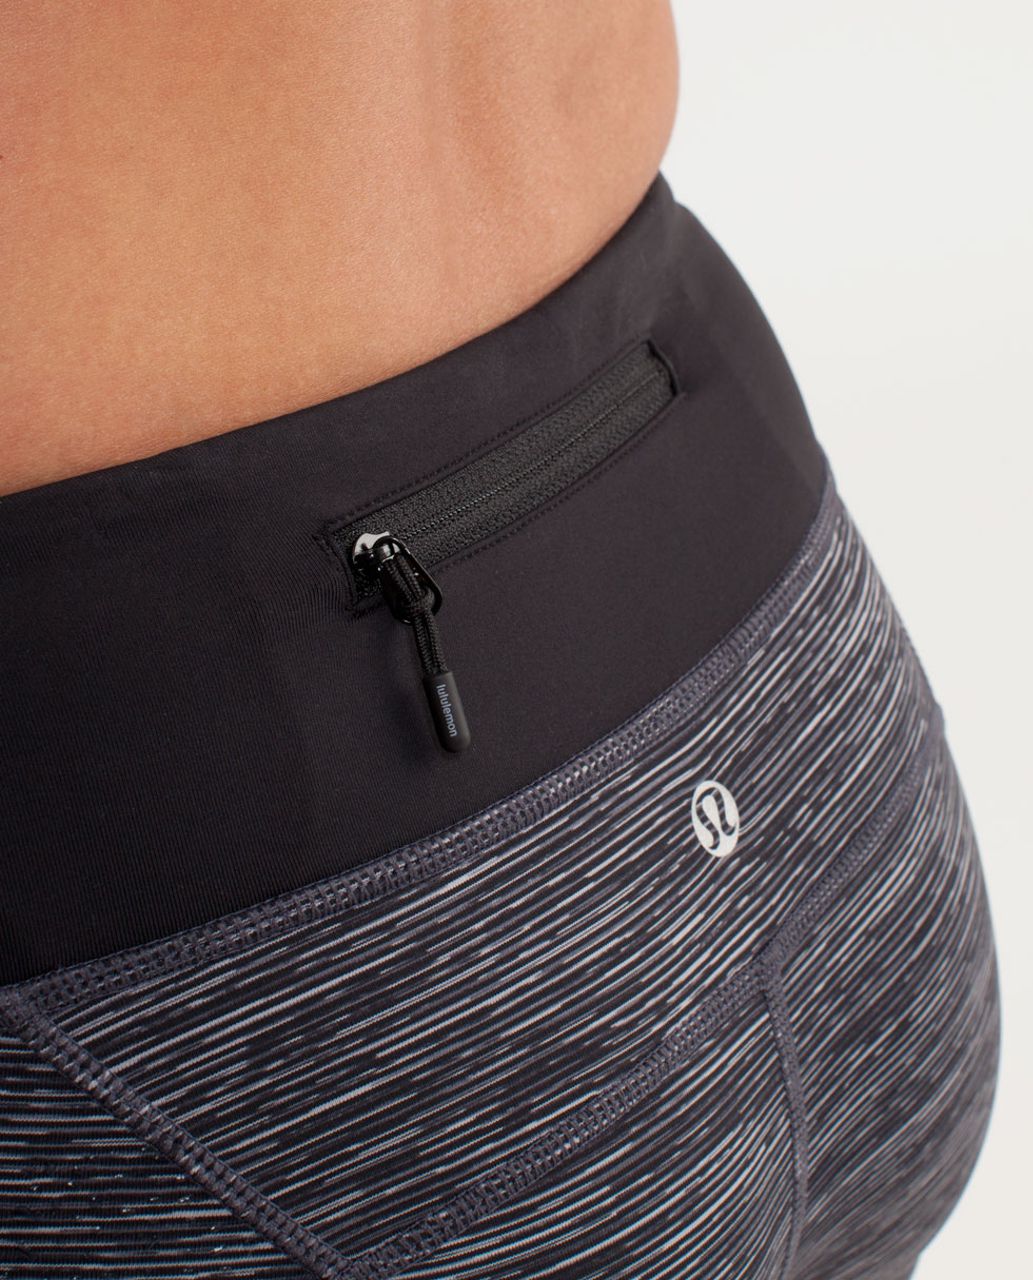 Lululemon Run:  Shorty Short - Wee Are From Space Black Combo /  Cut Out Lace Silicone Black